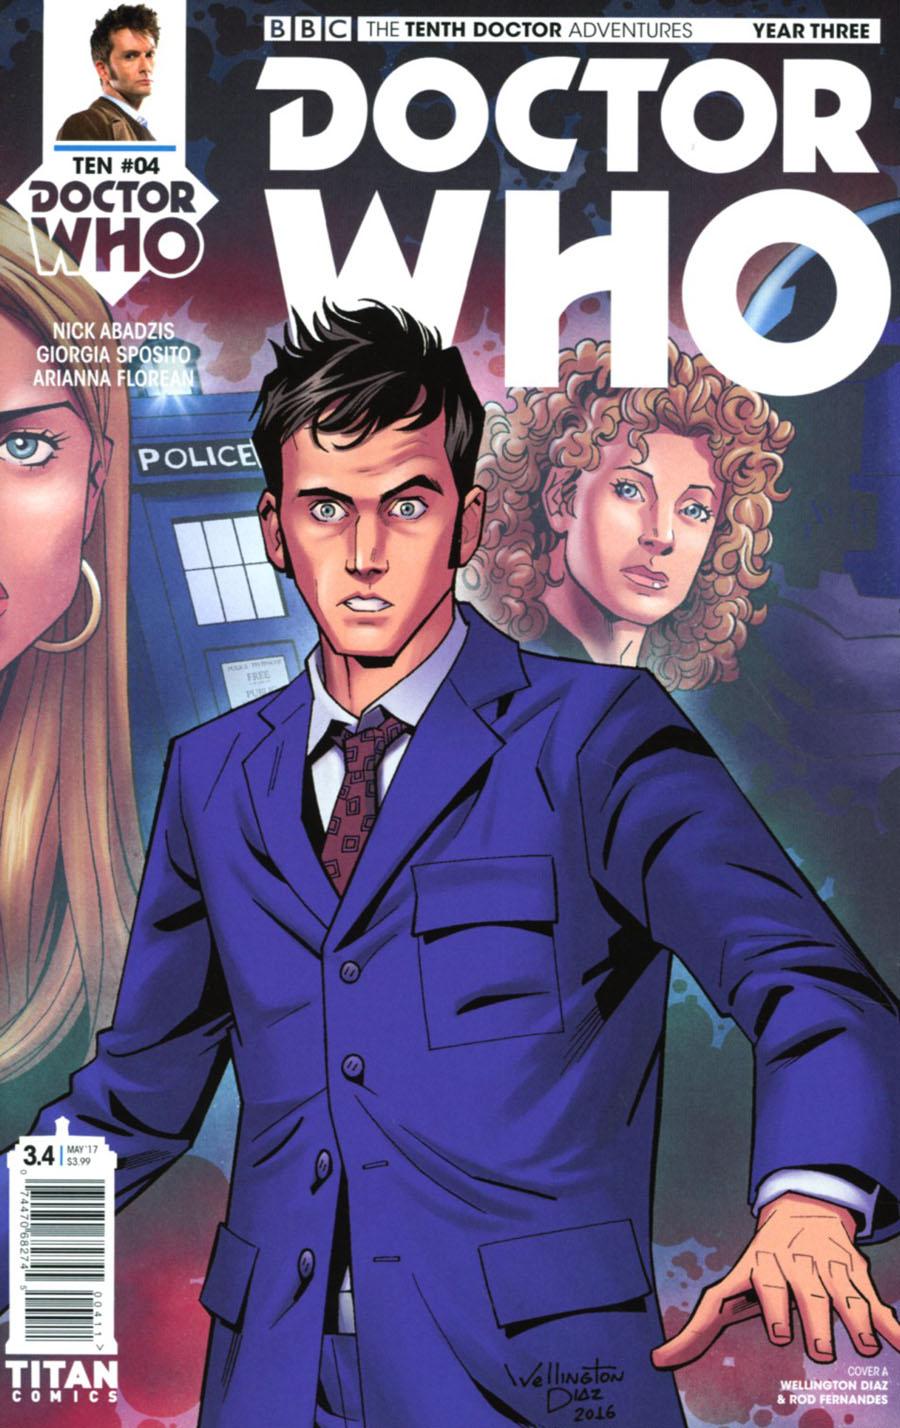 Doctor Who 10th Doctor Year Three Vol. 1 #4